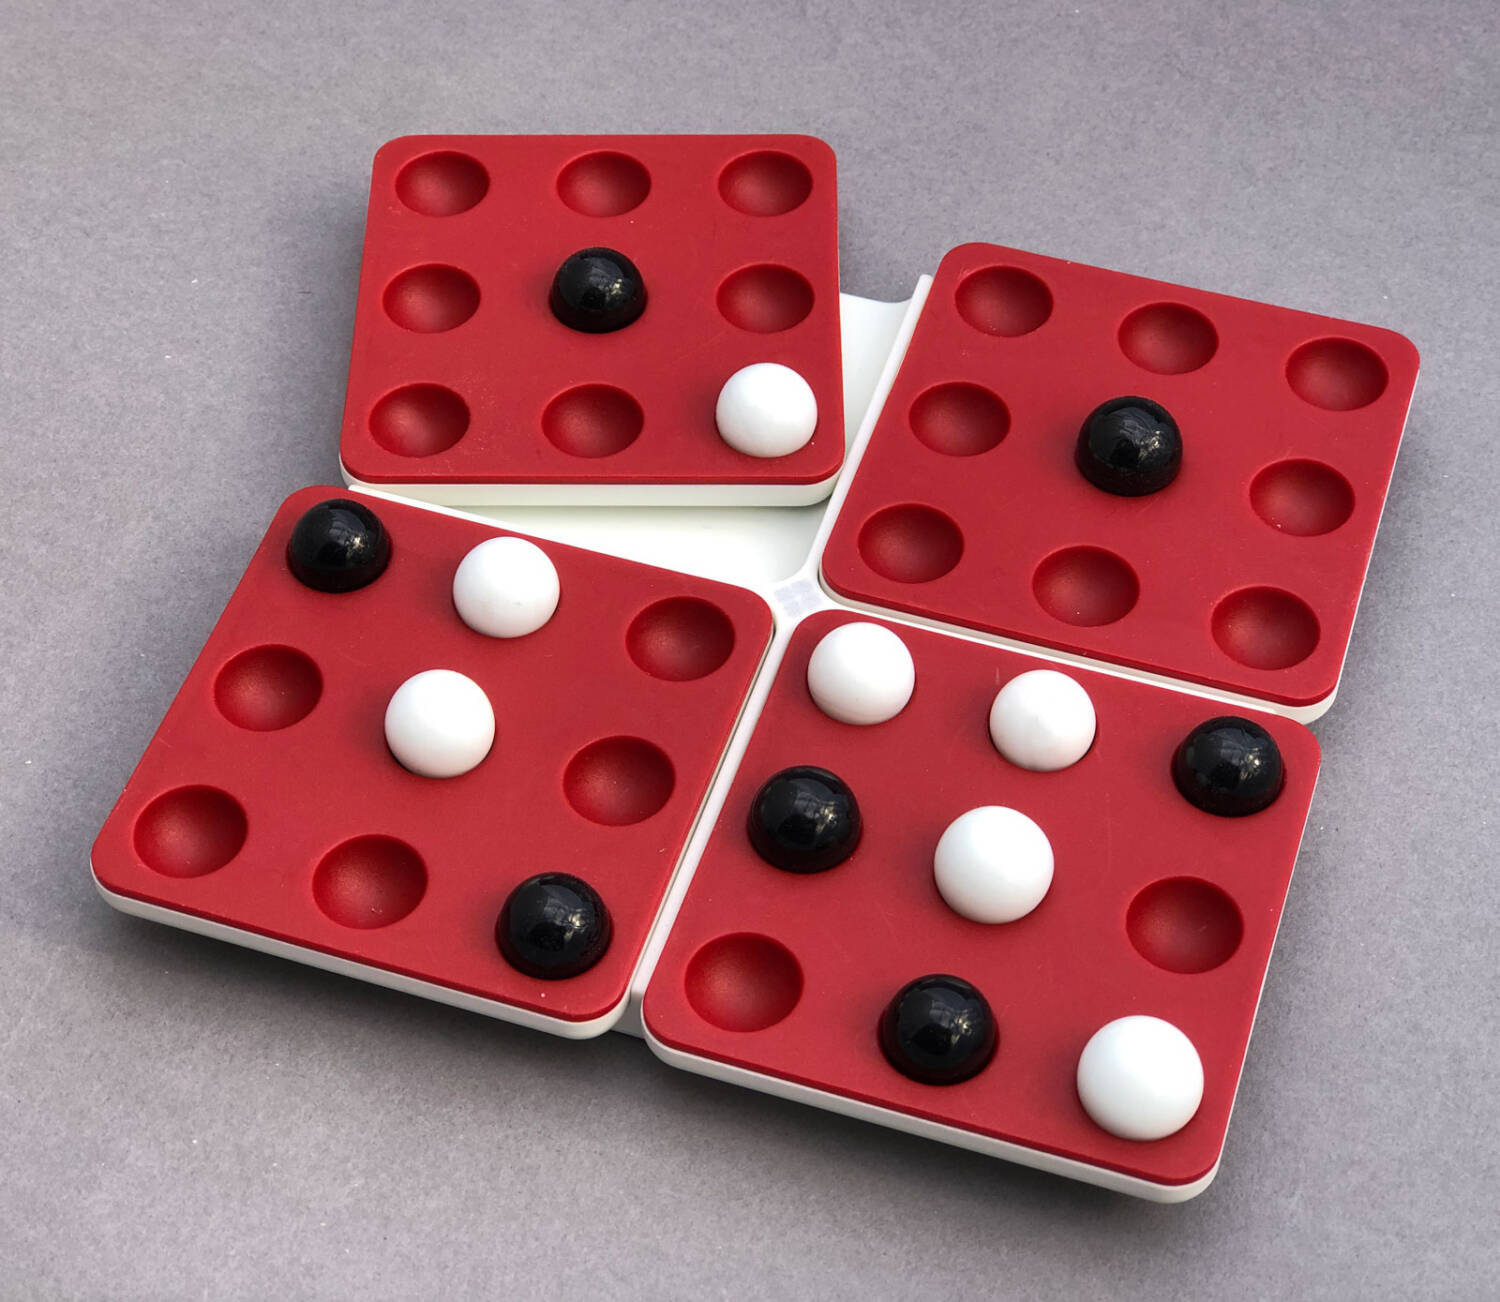 Each quadrant of the Pentago board pulls away from the others. Twisting a section of the board is a required step for each move in the game. 